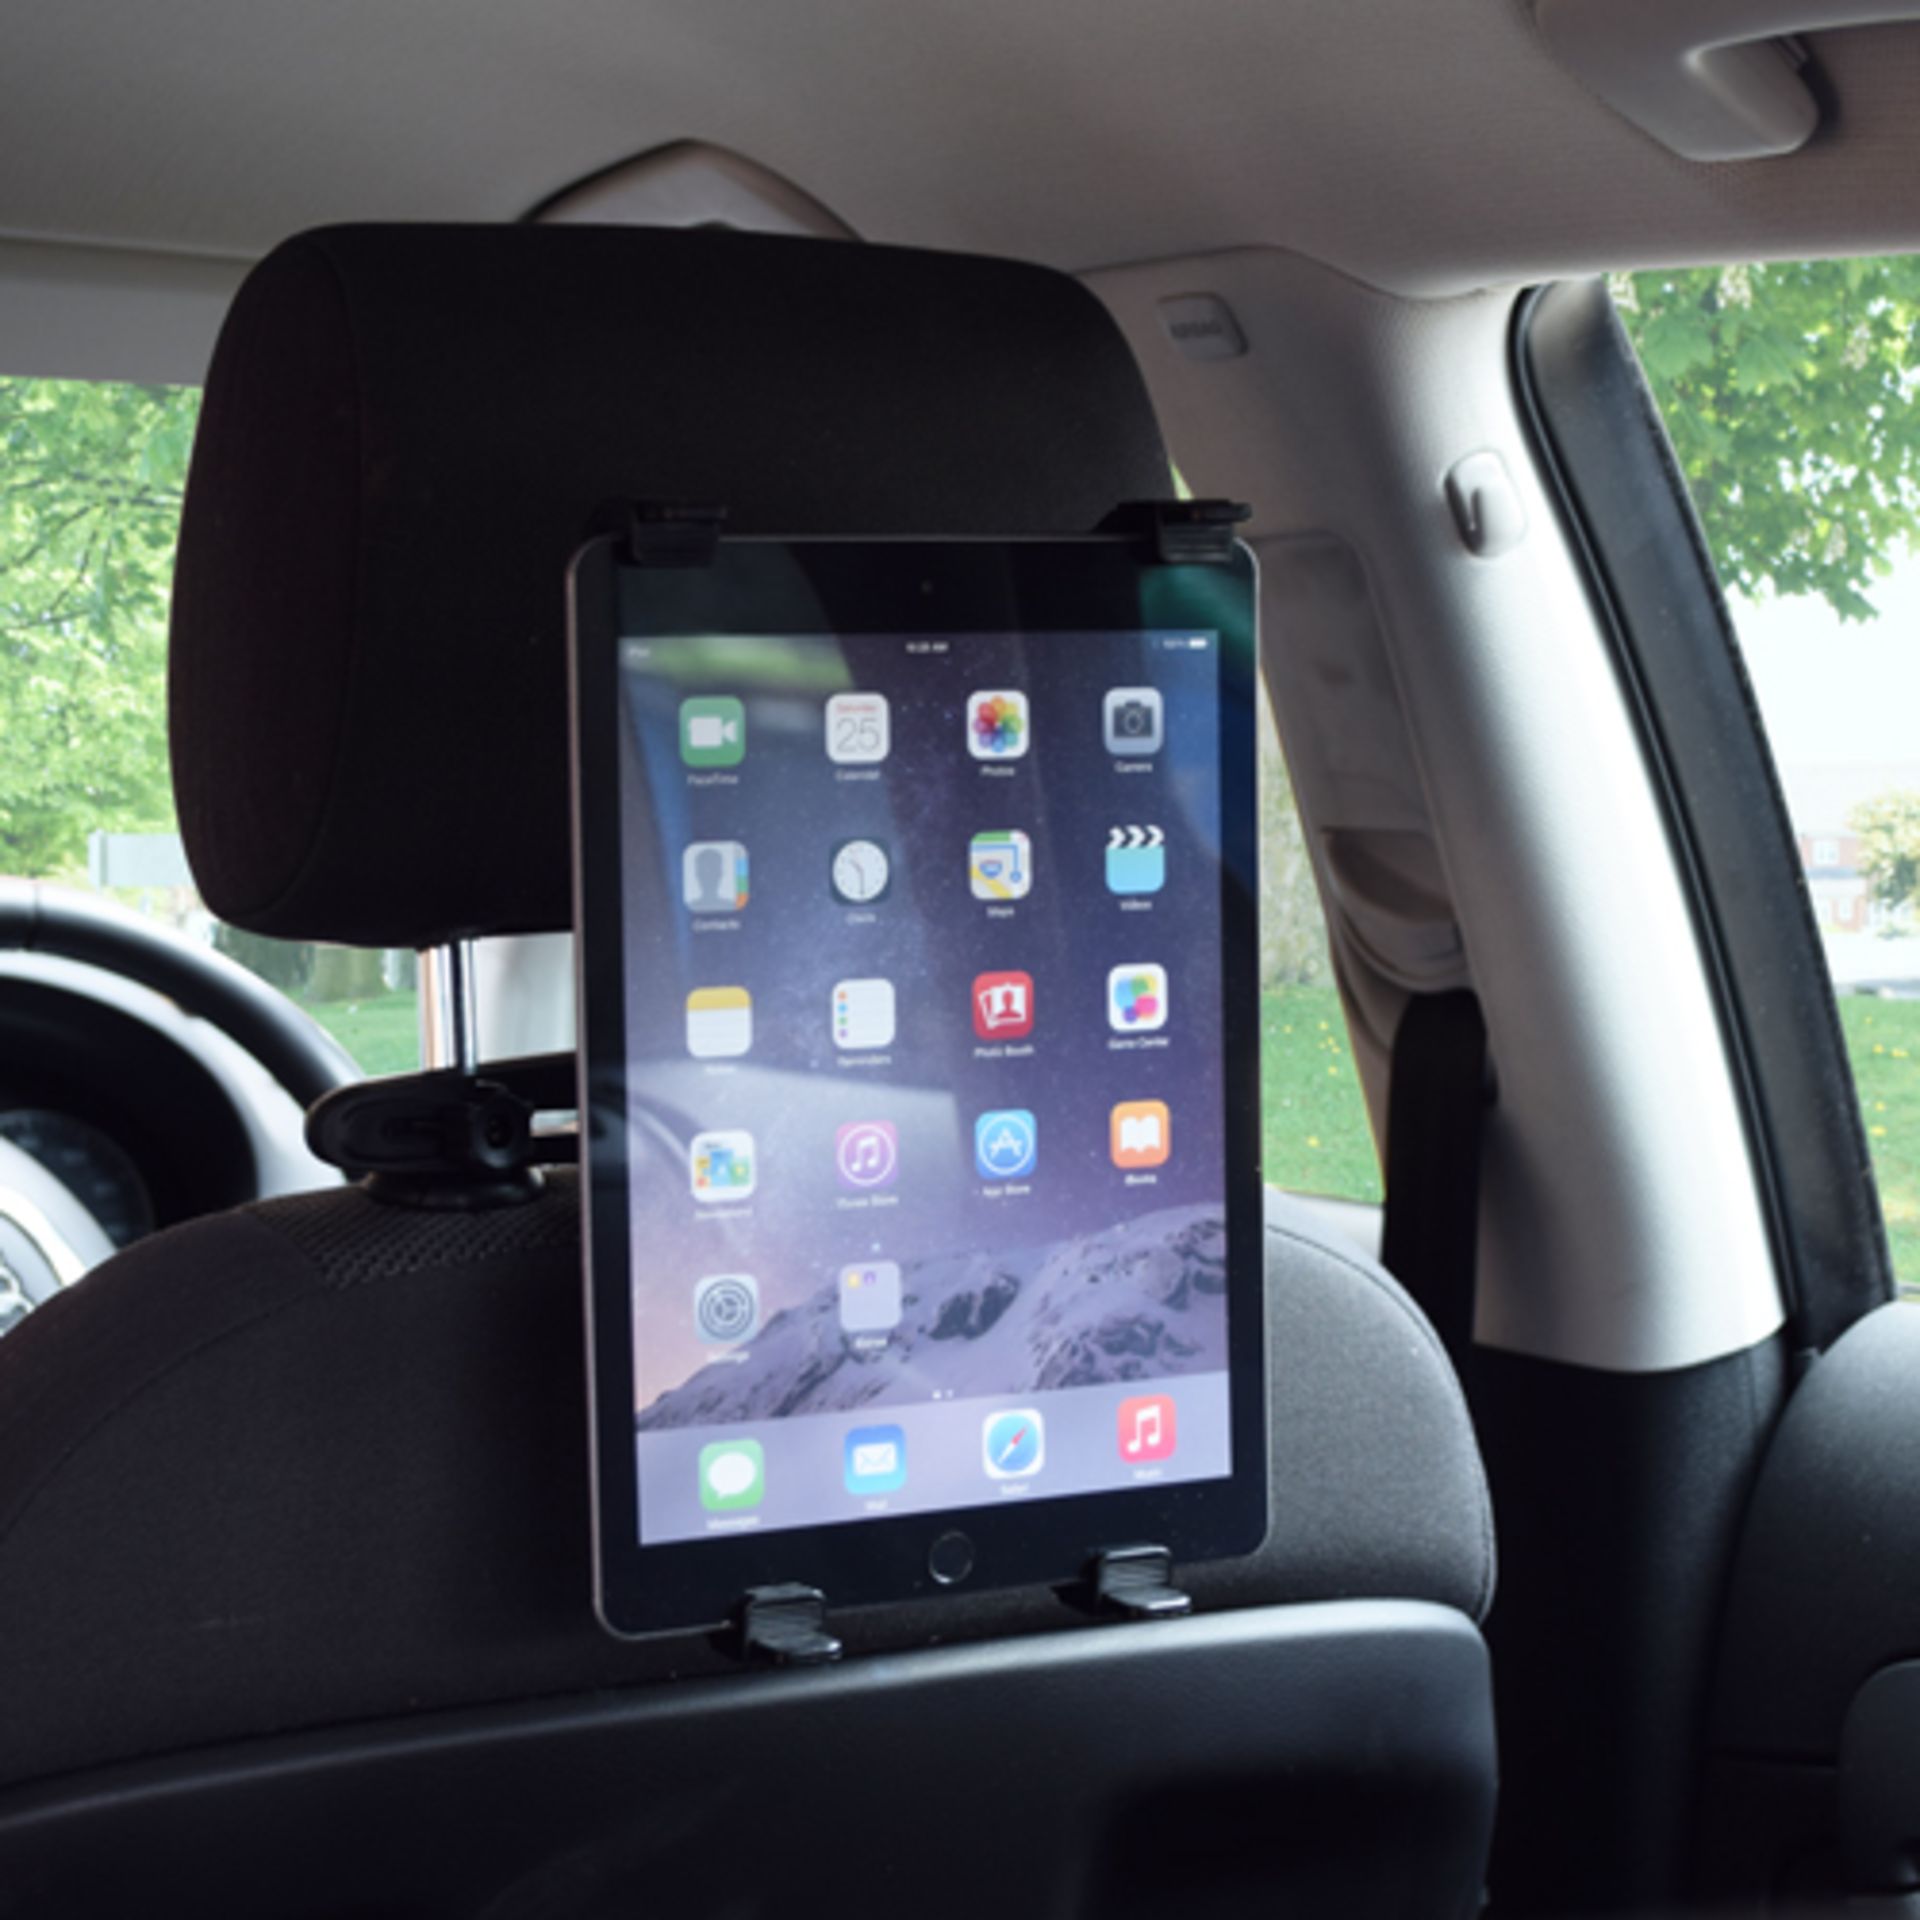 656 UNITS UNIVERSAL HOLDER FOR TABLETS - WINDOW & HEADREST MOUNTED - Image 4 of 5